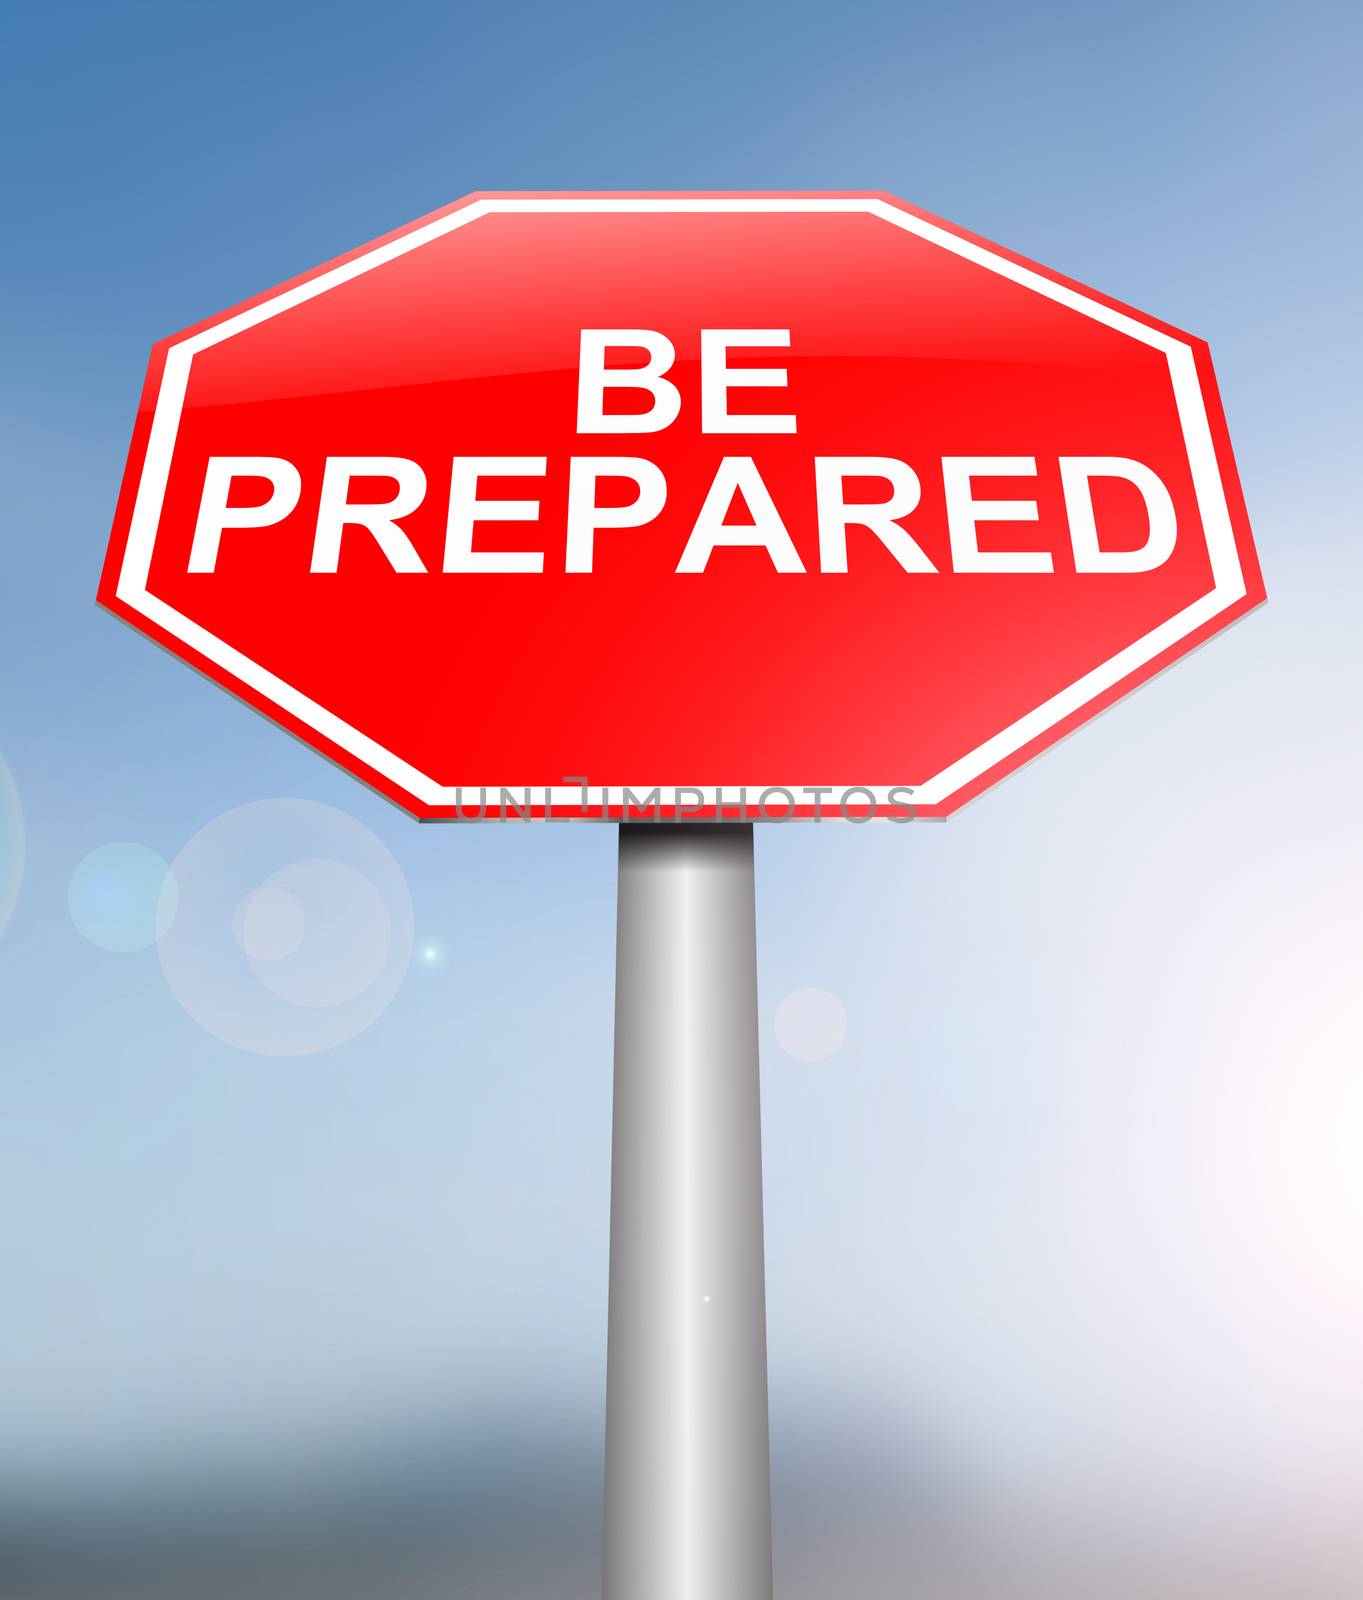 Illustration depicting a sign with a be prepared concept.